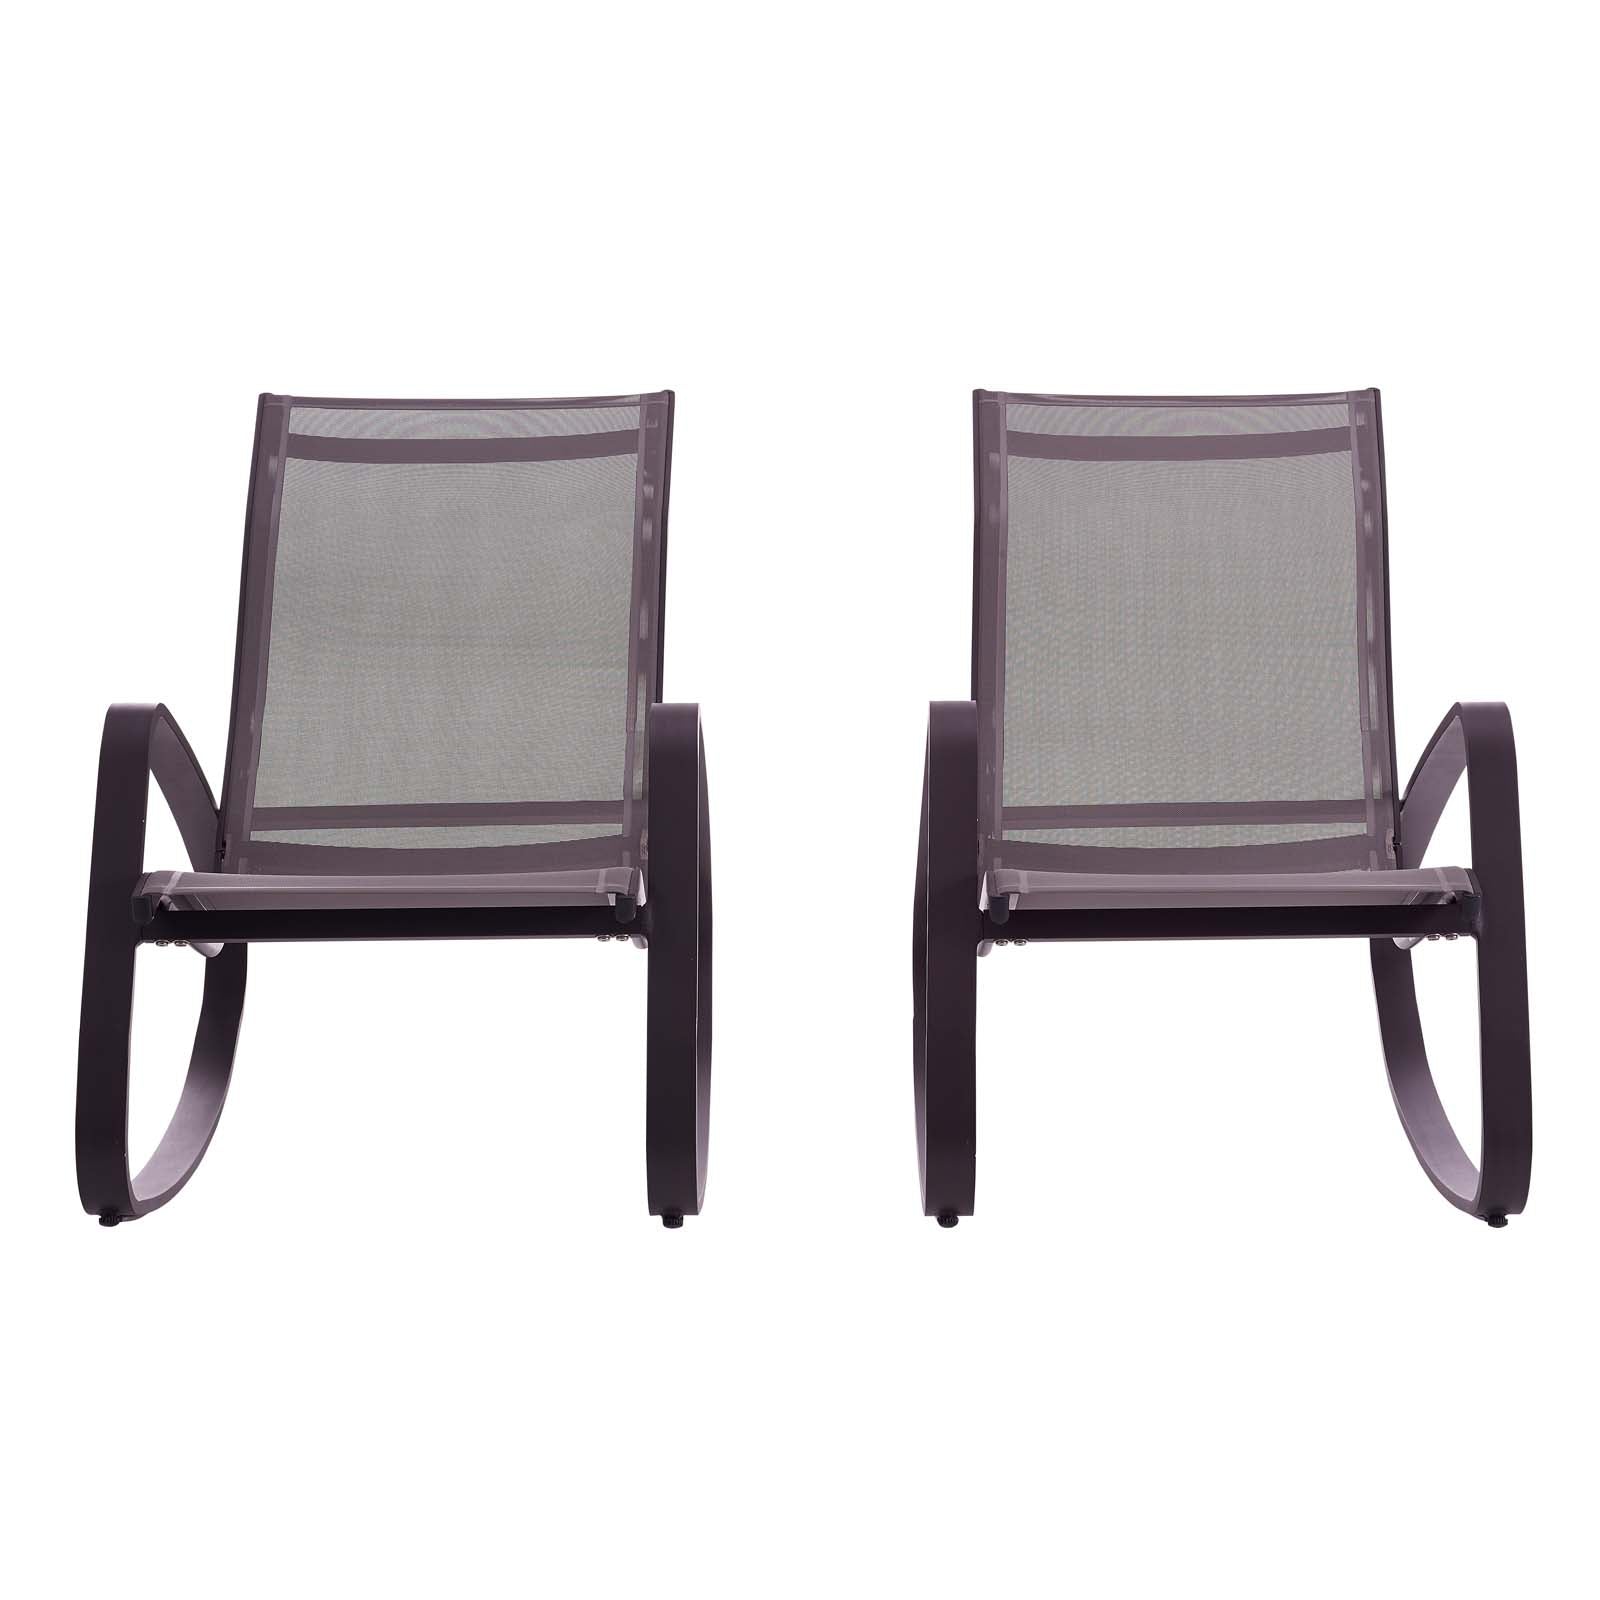 Traveler Rocking Lounge Chair Outdoor Patio Mesh Sling Set of 2-Outdoor Set-Modway-Wall2Wall Furnishings